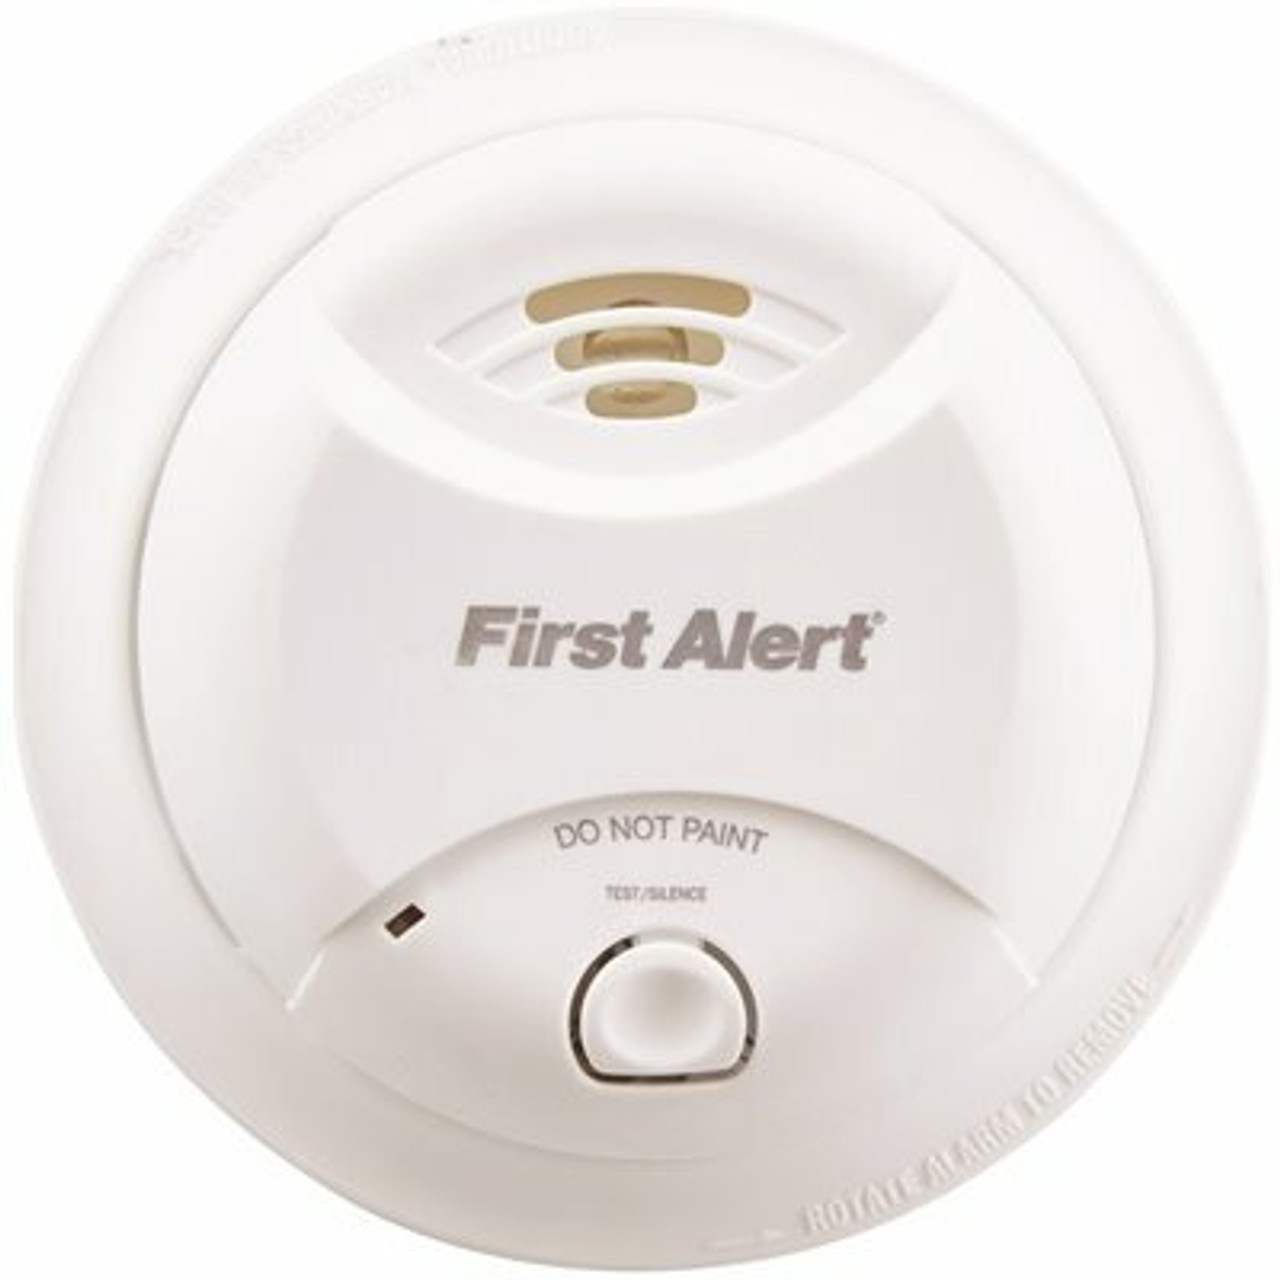 First Alert Lithium Power Cell Smoke Alarm, With Tamper Proof And Sealed Battery